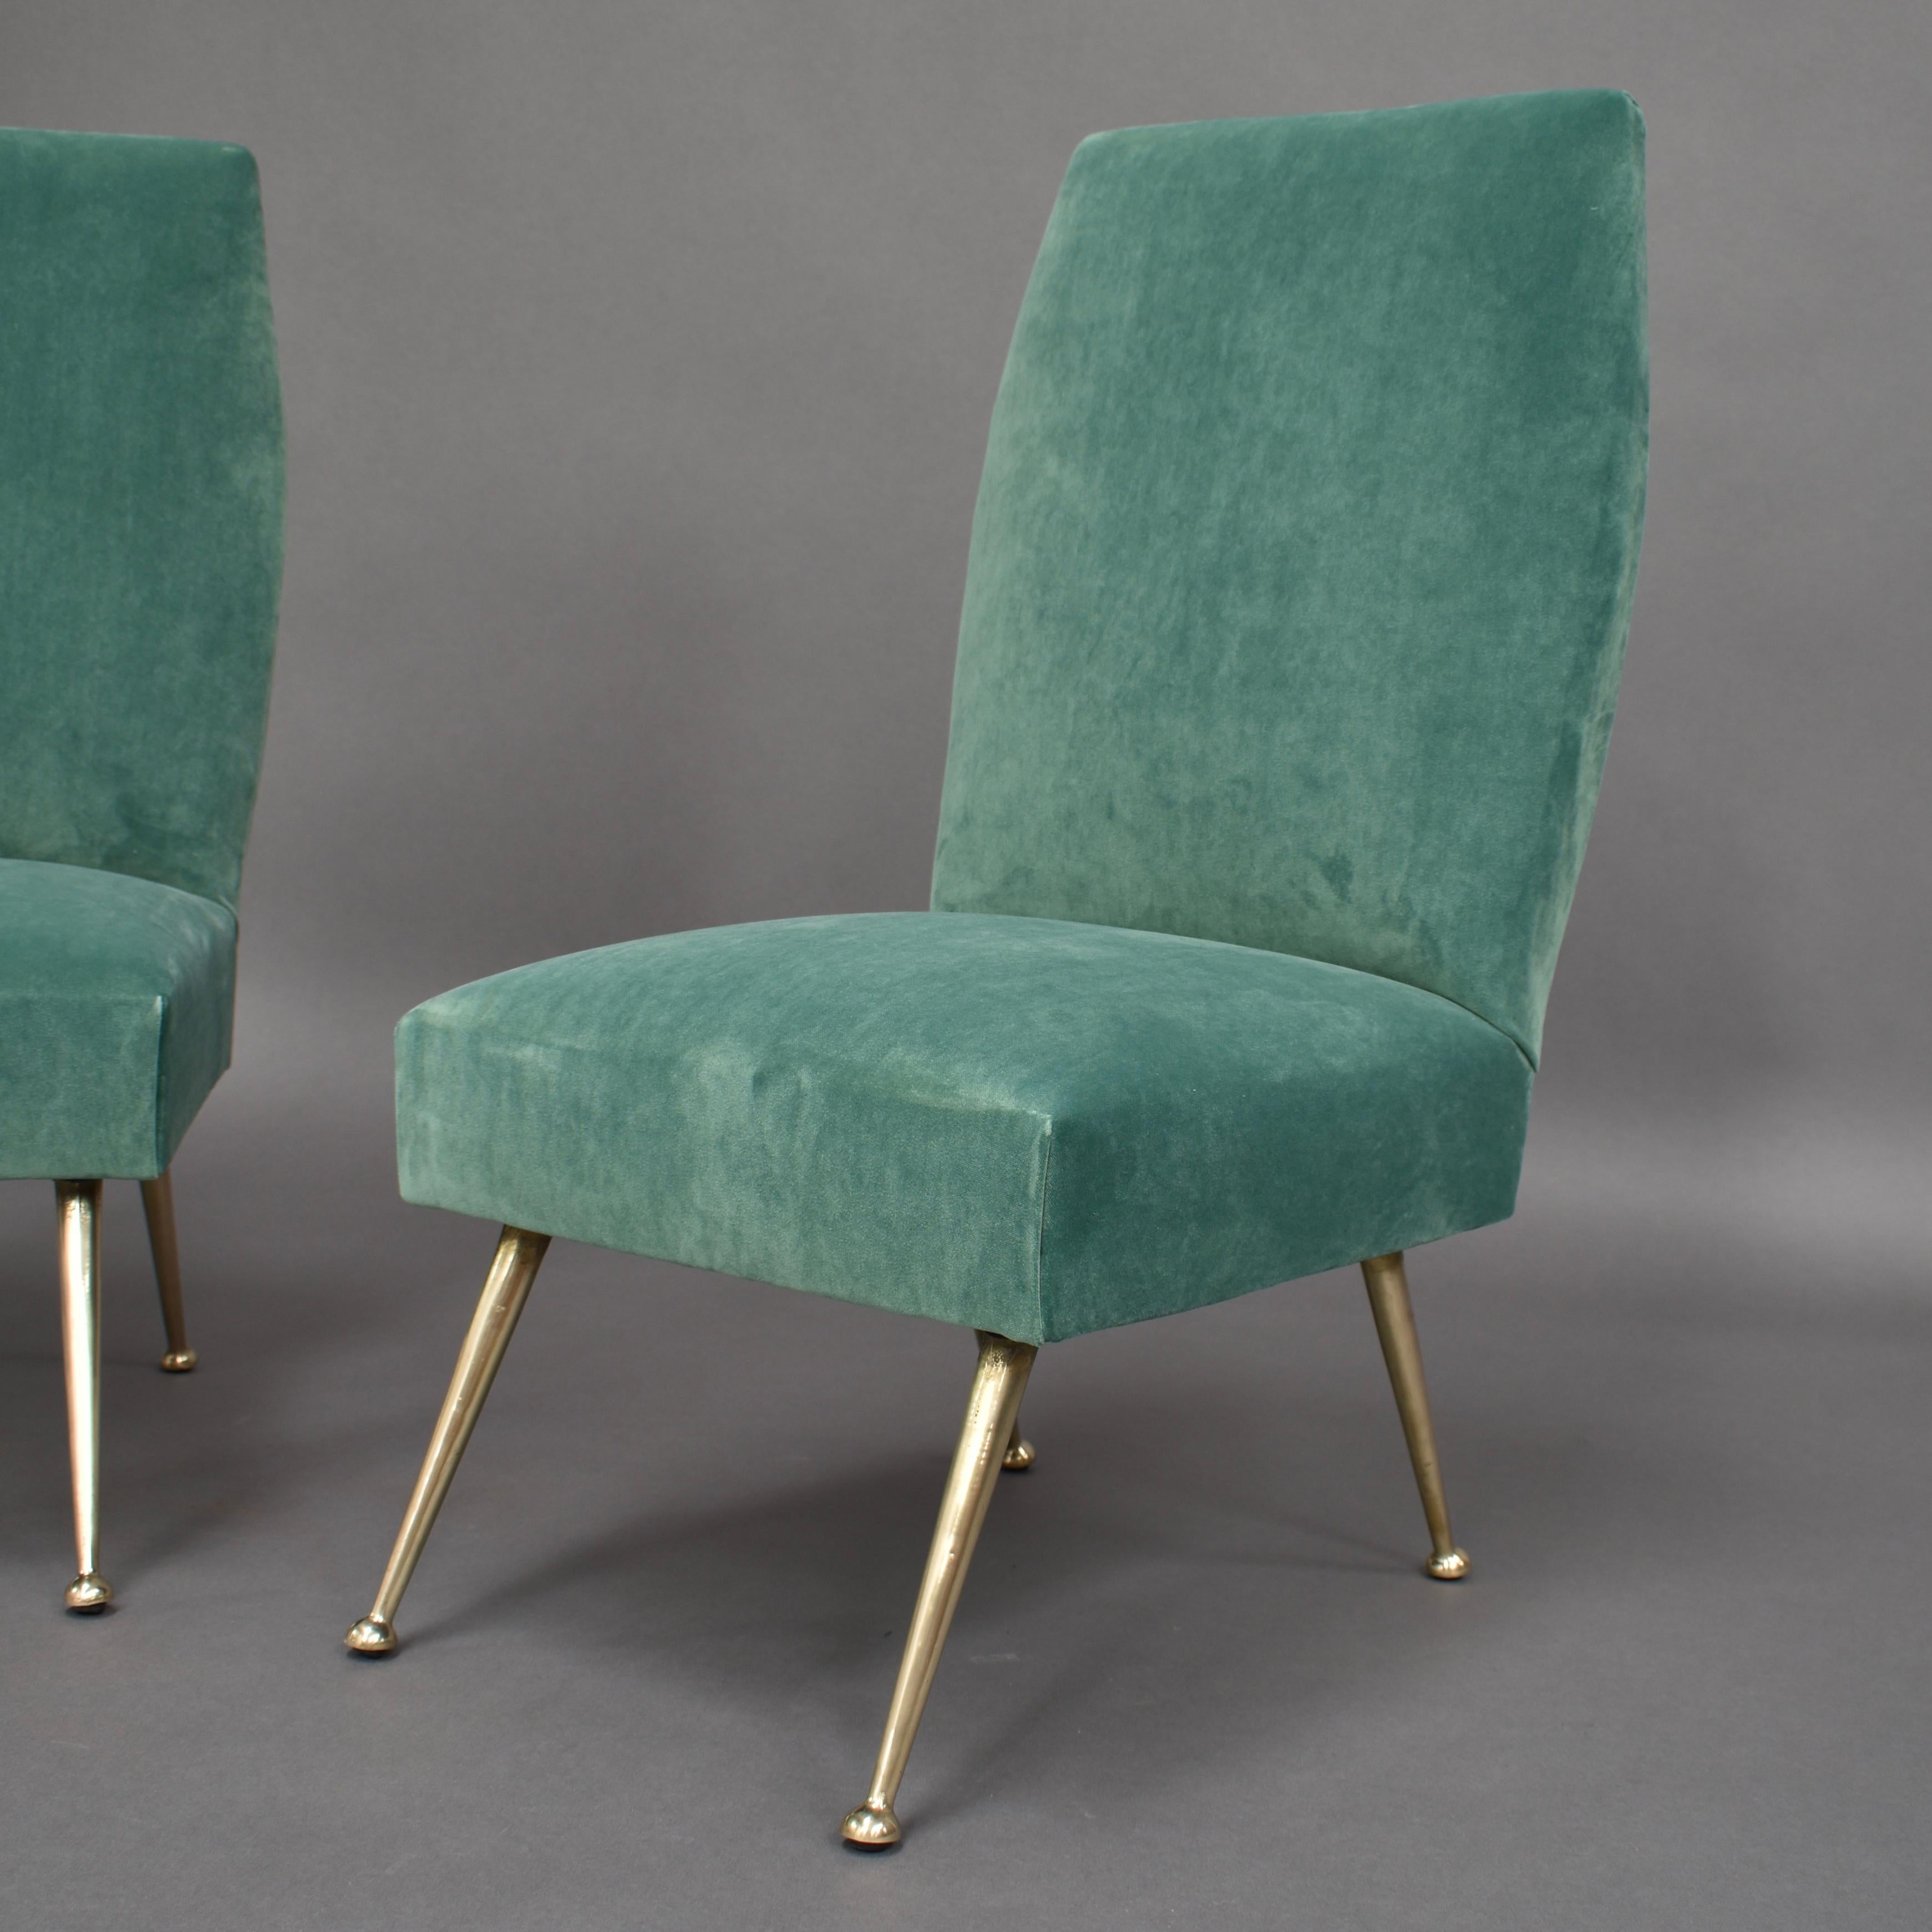 Mid-20th Century Gigi Radice Elegant and Trendy Pair of Side Chairs for Minotti, Italy, 1950s For Sale